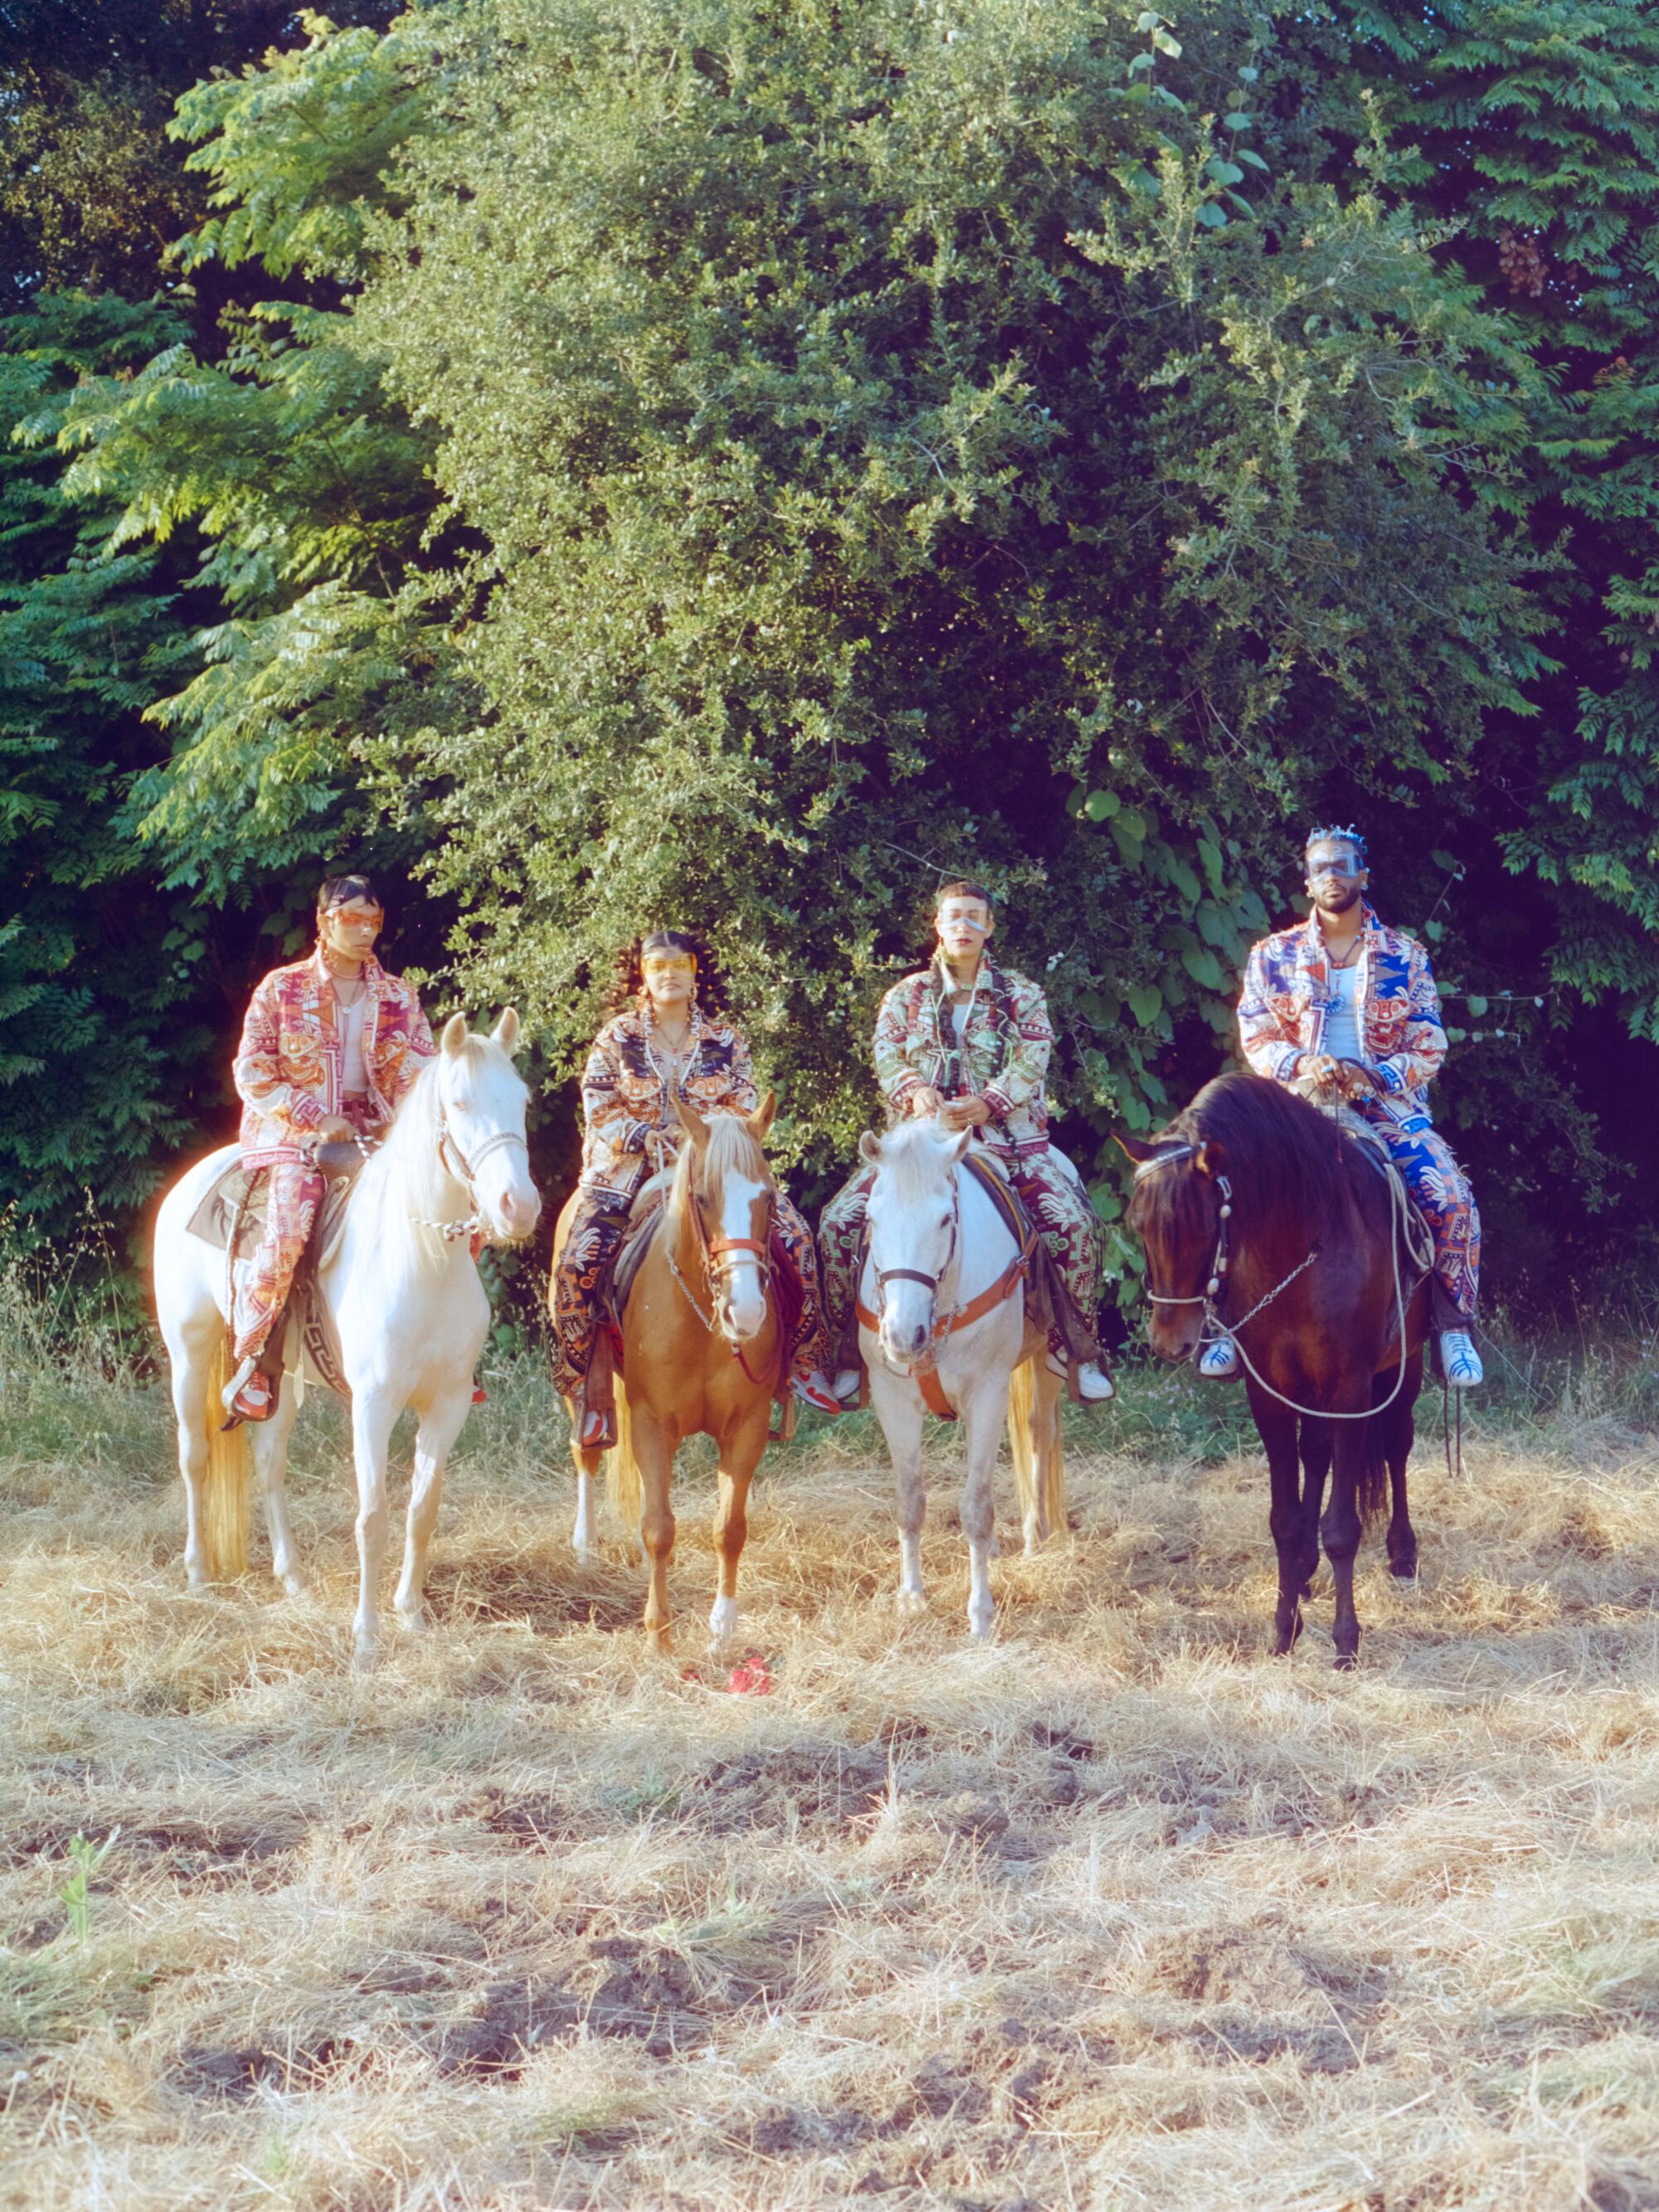 Jesus, Jamie, Maria and AJ — pictured on horses Luna, Paloma, Chulo and La Lumbre — wear Nike shoes modified by Equihua.